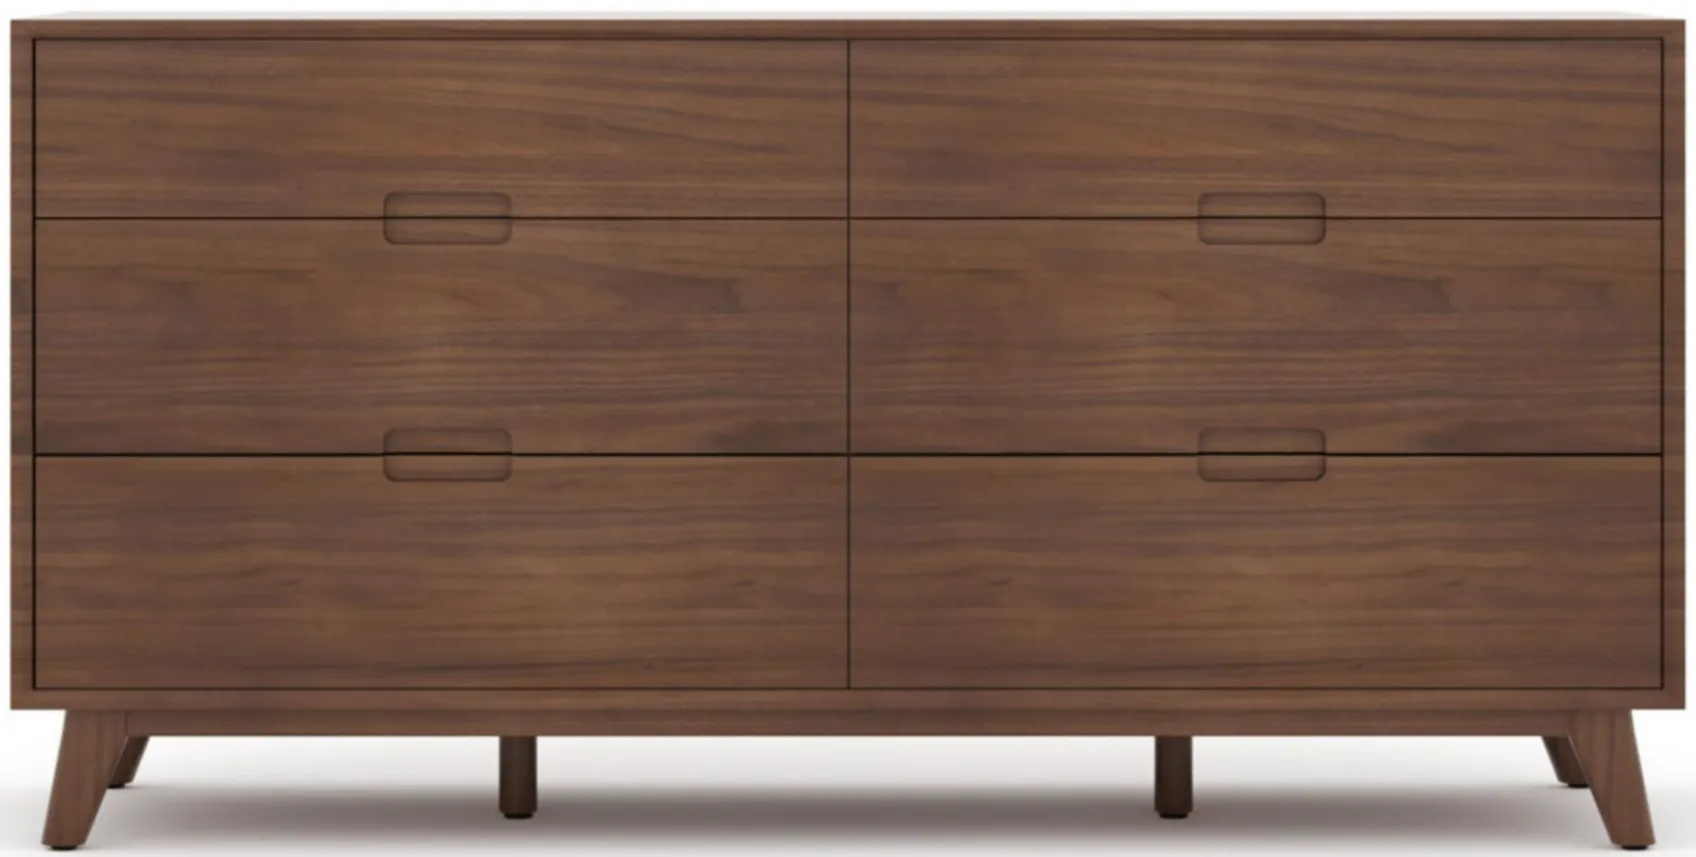 Selena Double Dresser in Walnut Stain by Unique Furniture